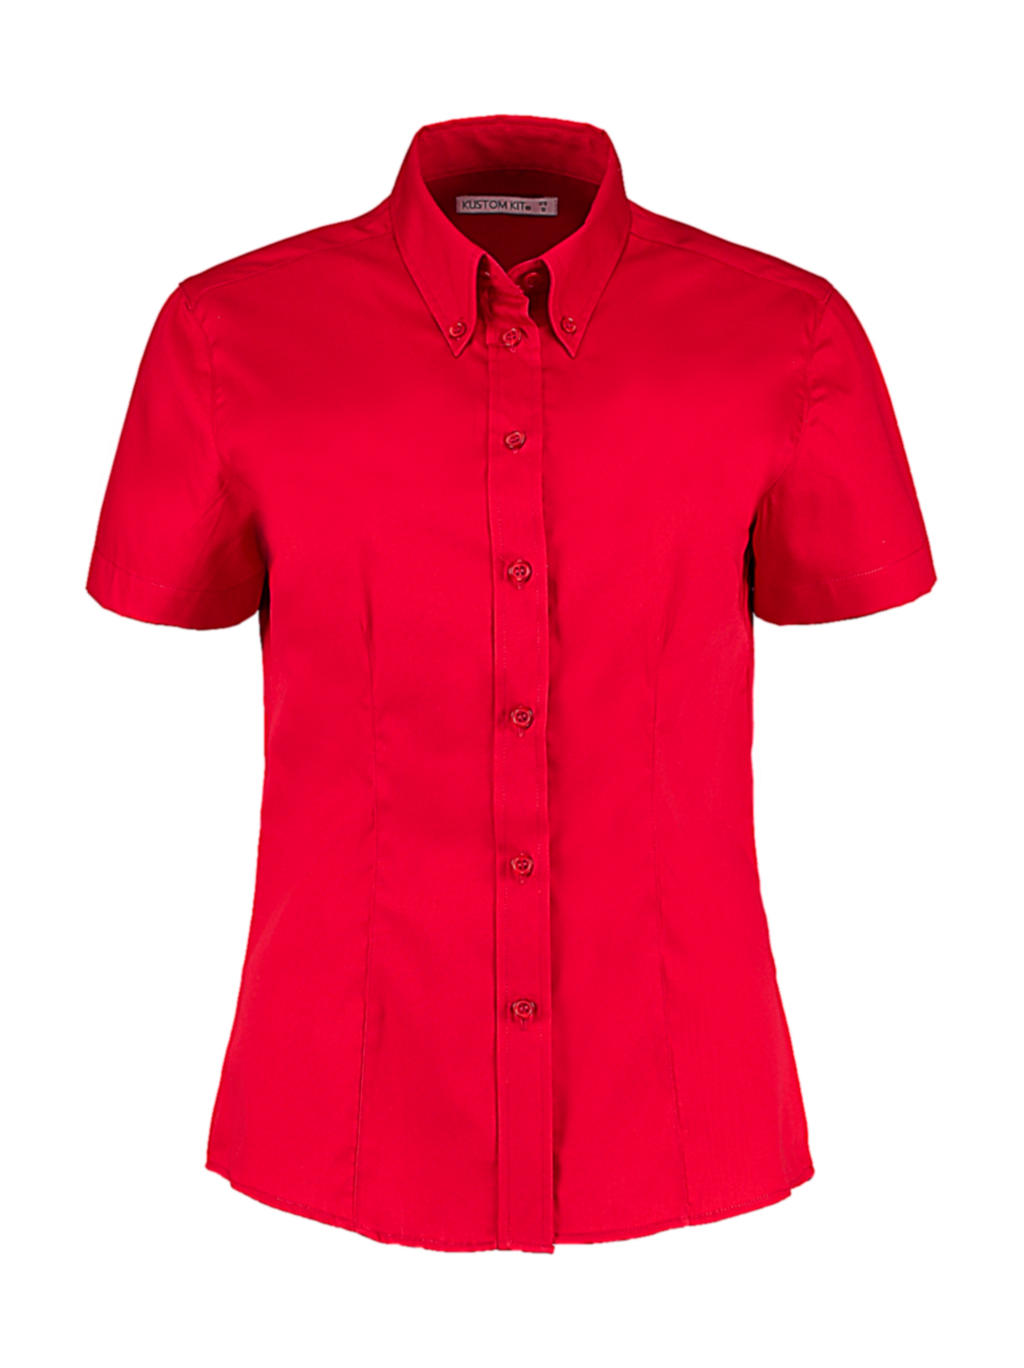  Womens Tailored Fit Premium Oxford Shirt SSL in Farbe Red